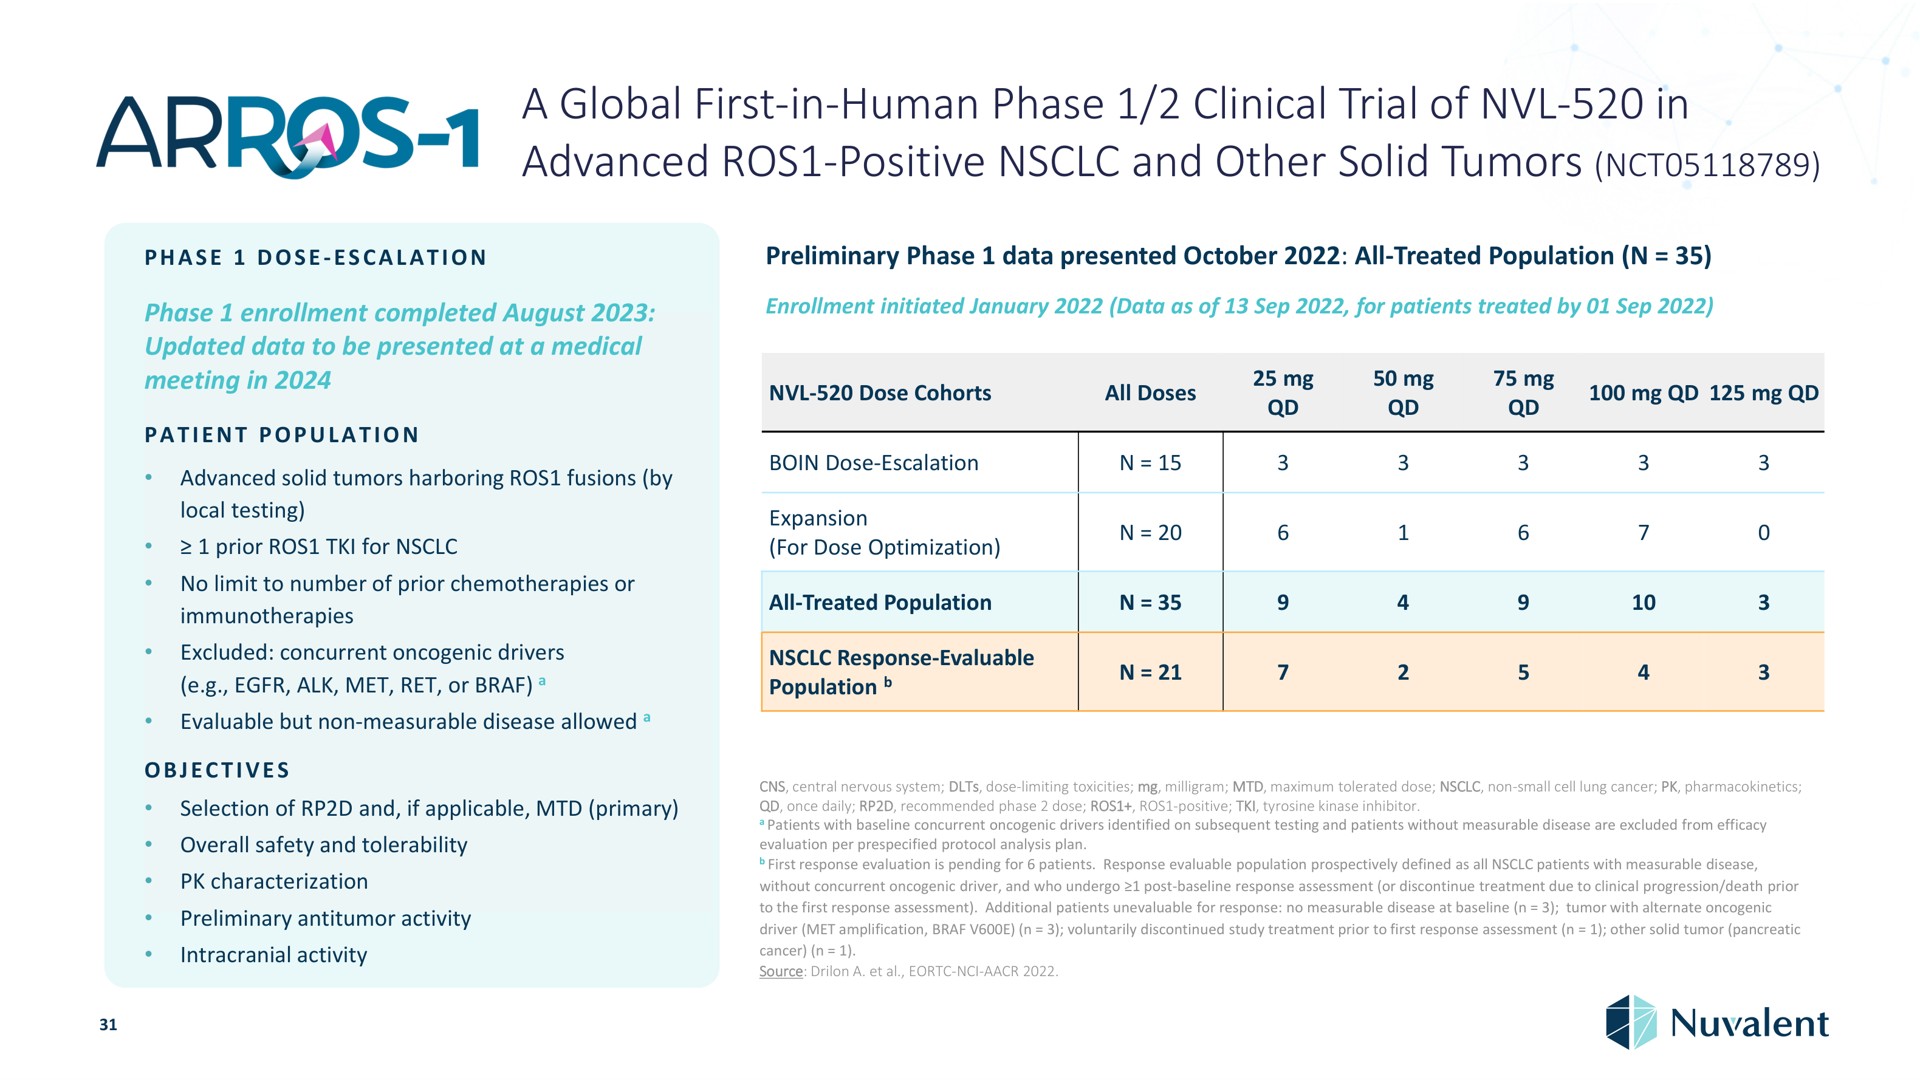 a global first in human phase clinical trial of in advanced positive and other solid tumors dose preliminary data presented all treated population enrollment completed august updated data to be presented at medical meeting patient population harboring fusions by local testing prior for no limit to number prior chemotherapies or excluded concurrent drivers alk met ret or evaluable but non measurable disease allowed objectives enrollment initiated data as for patients treated by dose cohorts all doses dose expansion for dose optimization tit all treated population response evaluable population selection if applicable primary overall safety tolerability characterization preliminary activity intracranial activity central nervous system dose limiting toxicities milligram maximum tolerated dose non small cell lung cancer once daily recommended dose tyrosine kinase inhibitor patients with concurrent drivers identified on subsequent testing patients without measurable disease are excluded from efficacy evaluation per protocol analysis plan first response evaluation is pending for patients response evaluable population prospectively defined as all patients with measurable disease without concurrent driver who undergo post response assessment or discontinue treatment due to progression death prior to the first response assessment additional patients for response no measurable disease at tumor with alternate driver met amplification voluntarily discontinued study treatment prior to first response assessment tumor pancreatic cancer source | Nuvalent